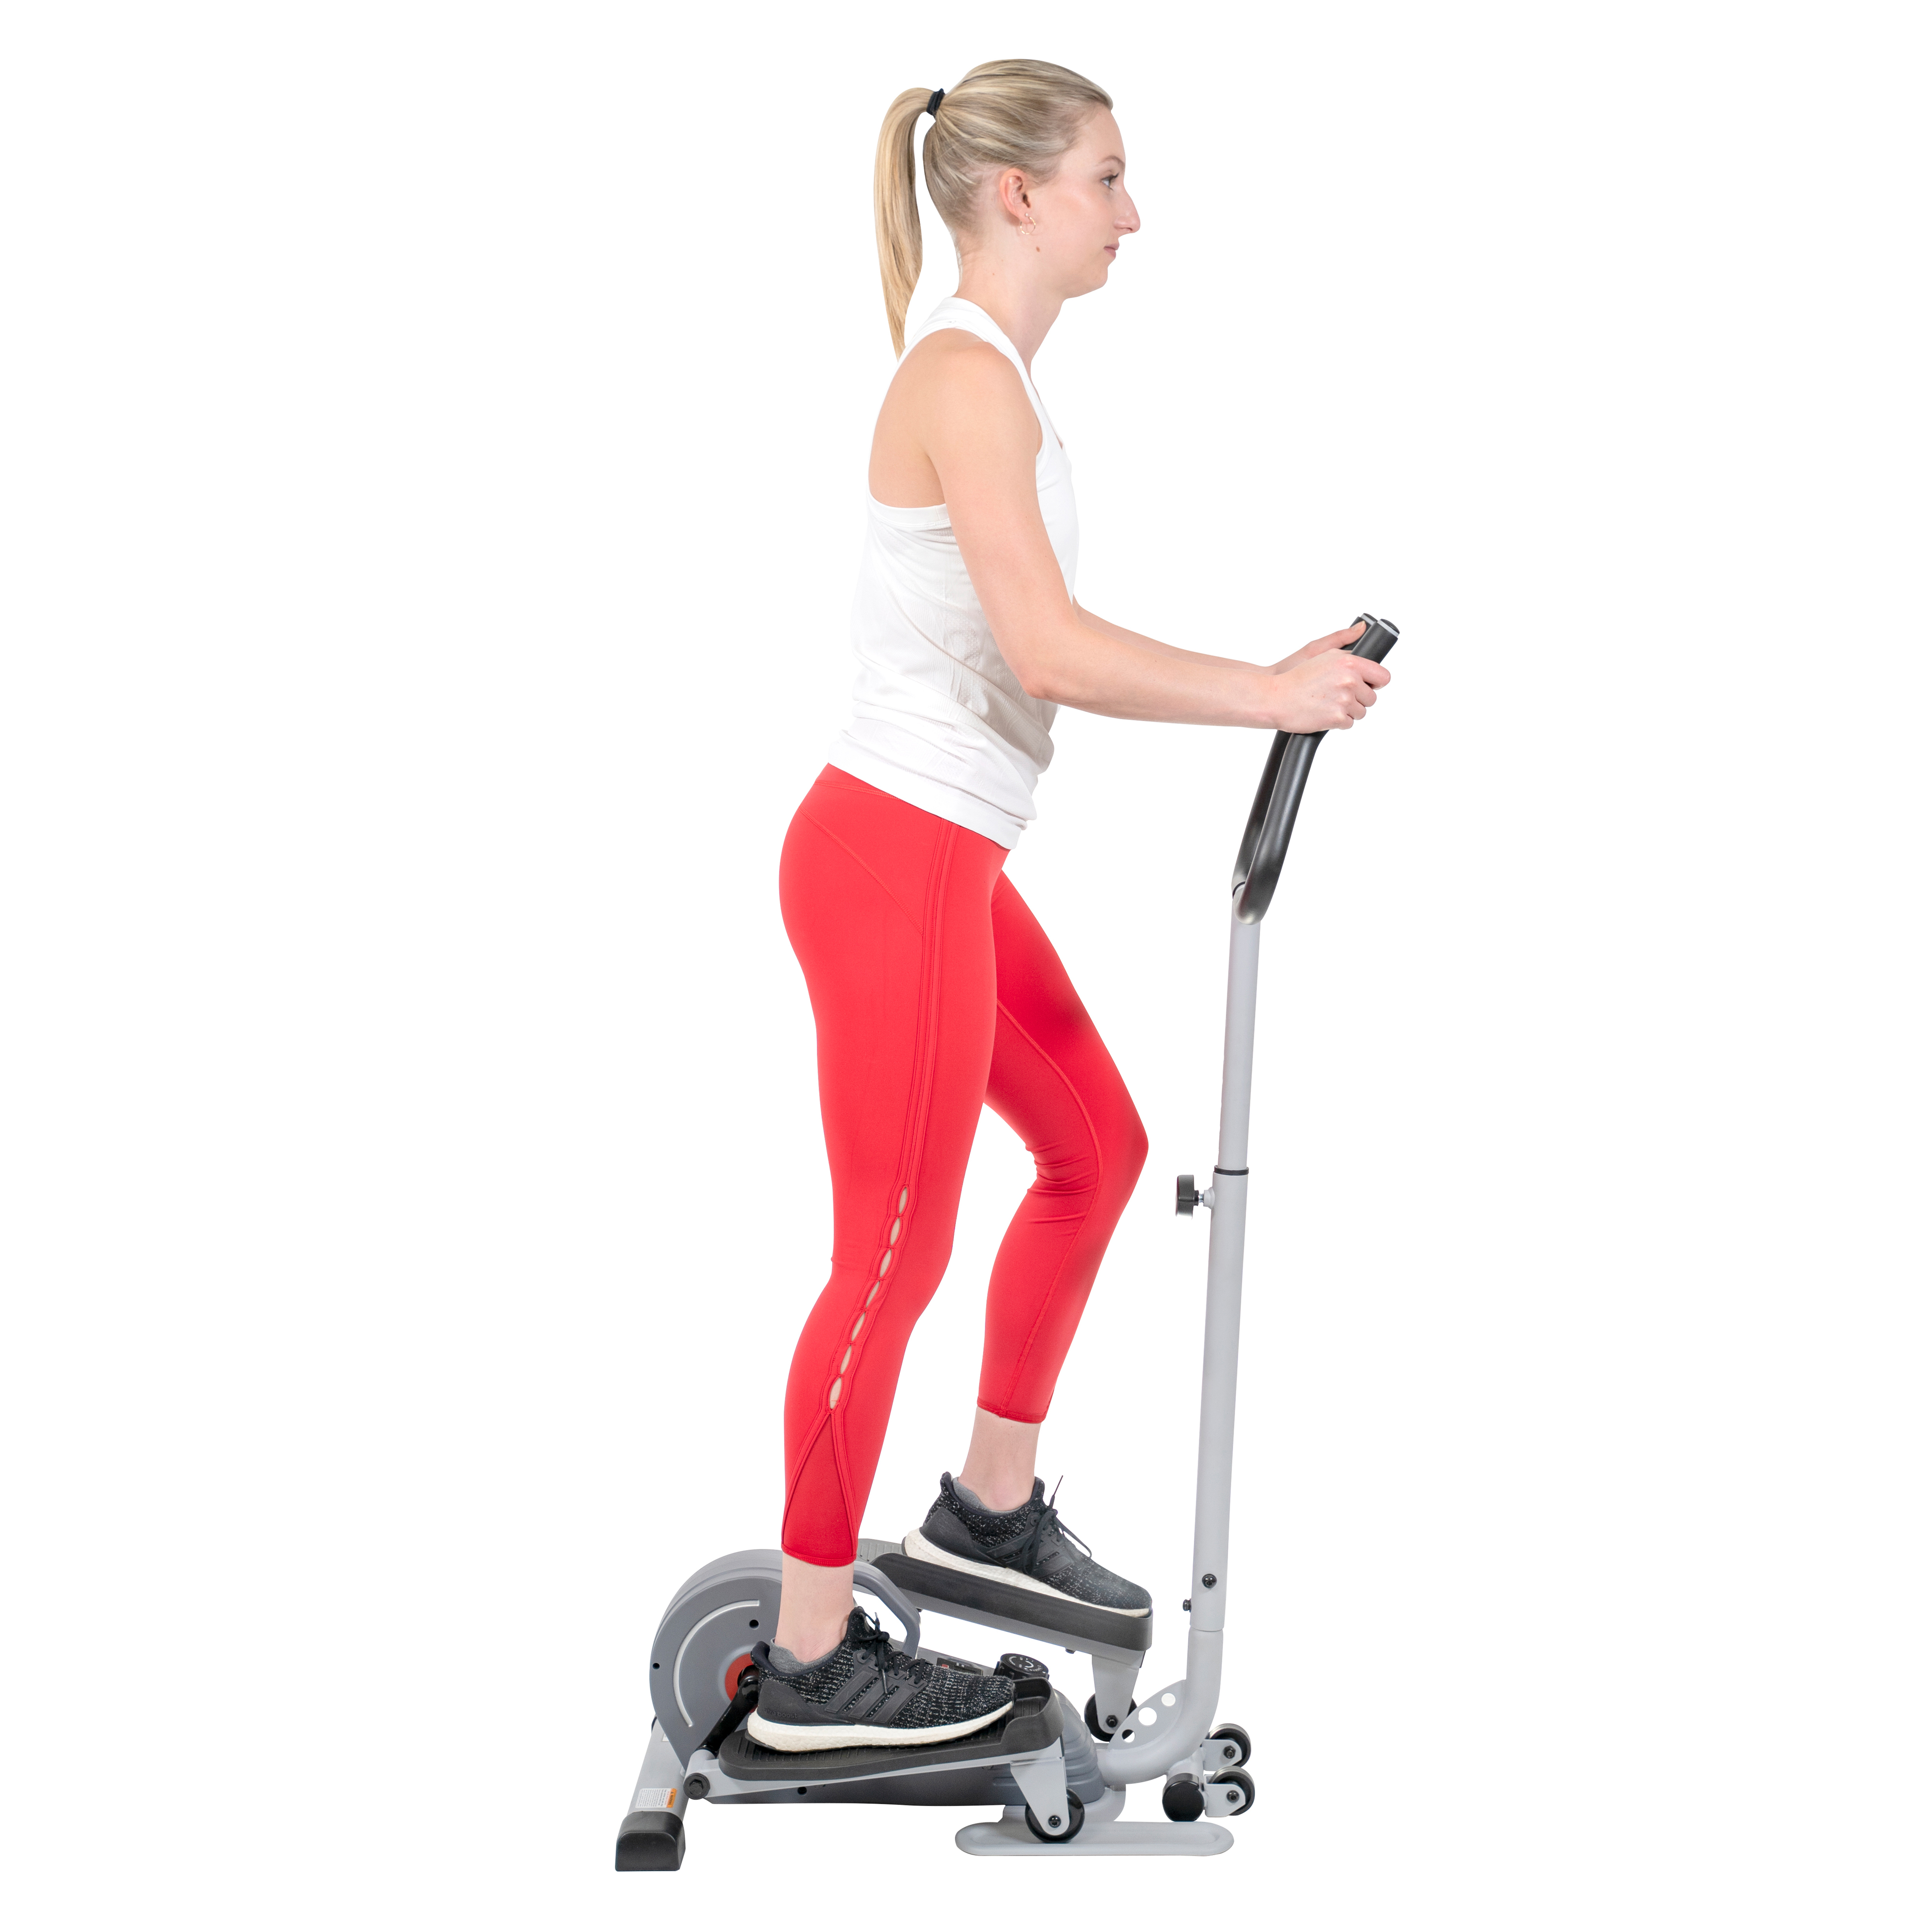 Sunny Health & Fitness Compact Magnetic Standing Elliptical Machine w/ Handlebars - Portable Workout Stepper for Home, SF-E3988 - image 7 of 18